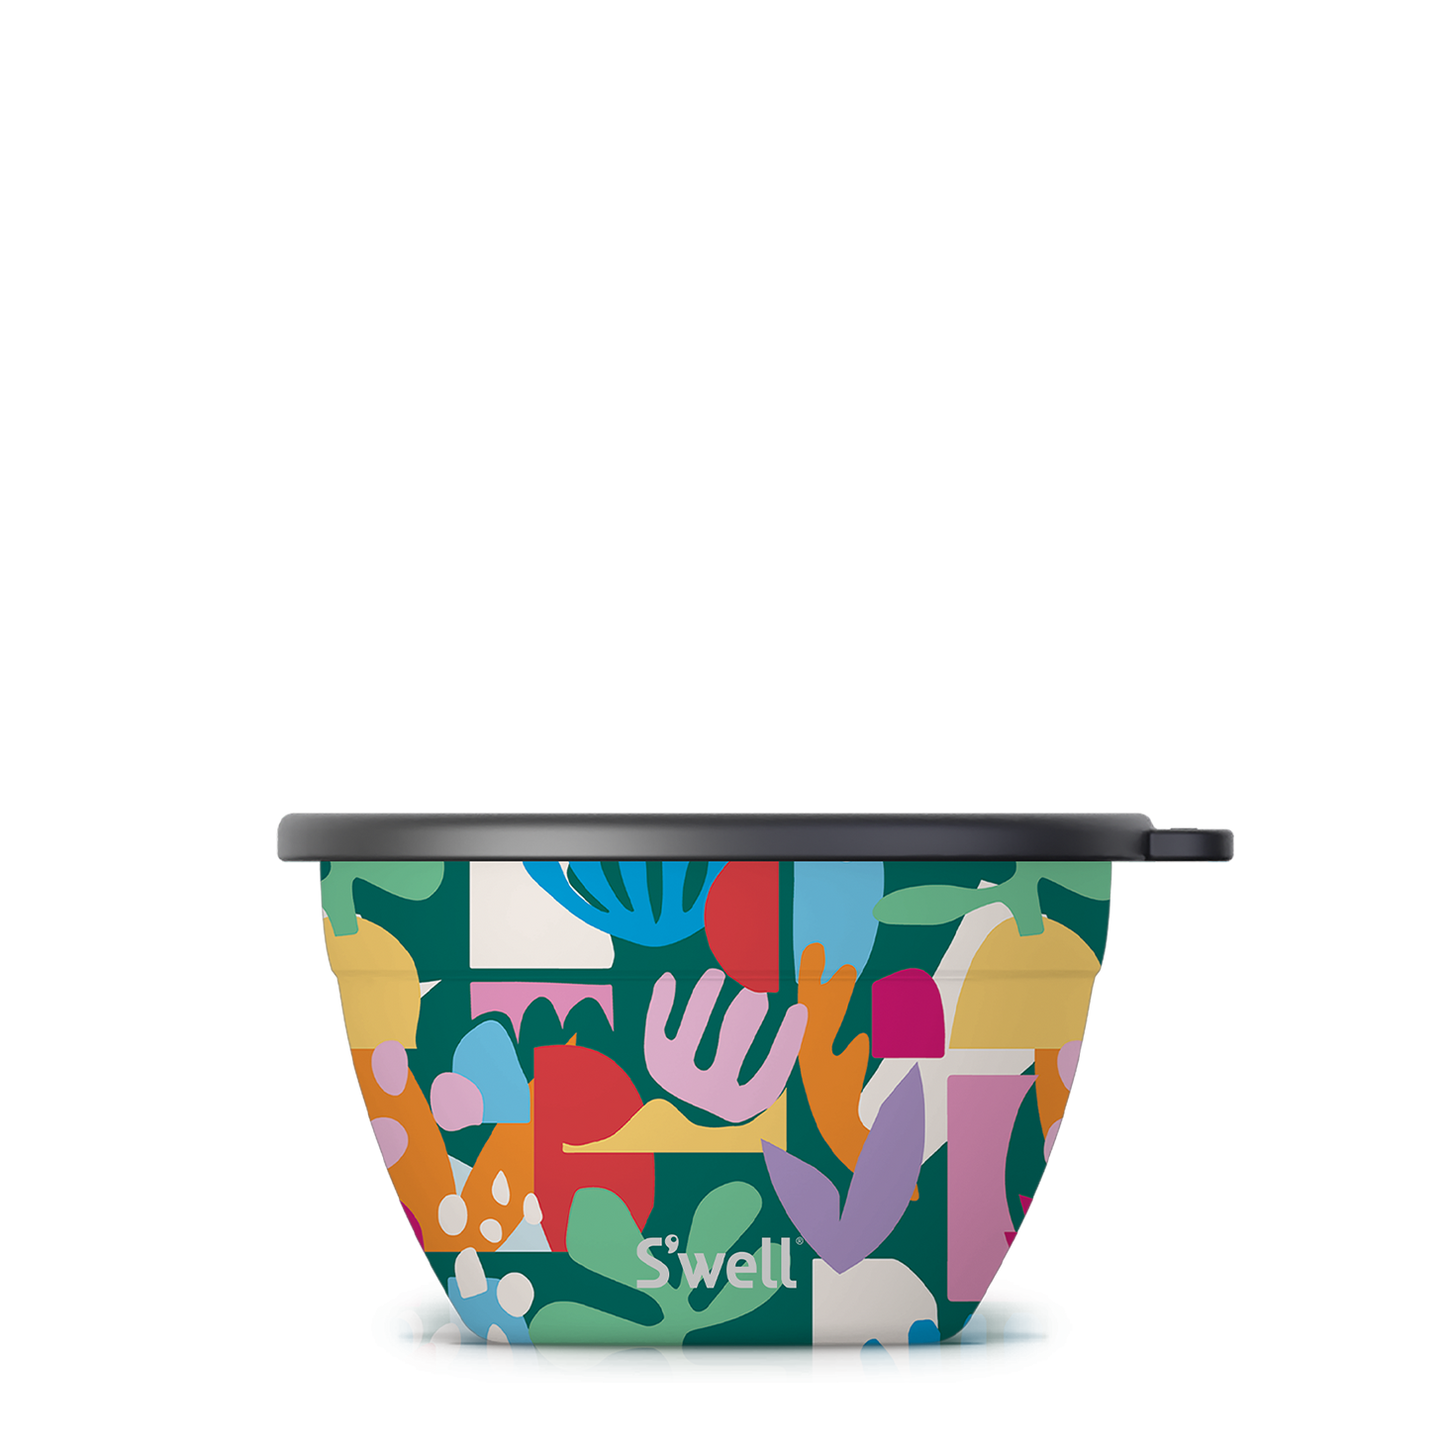 Paper Cutouts S'well Salad Bowl Kit  64oz  S'well   -better made easy-eco-friendly-sustainable-gifting